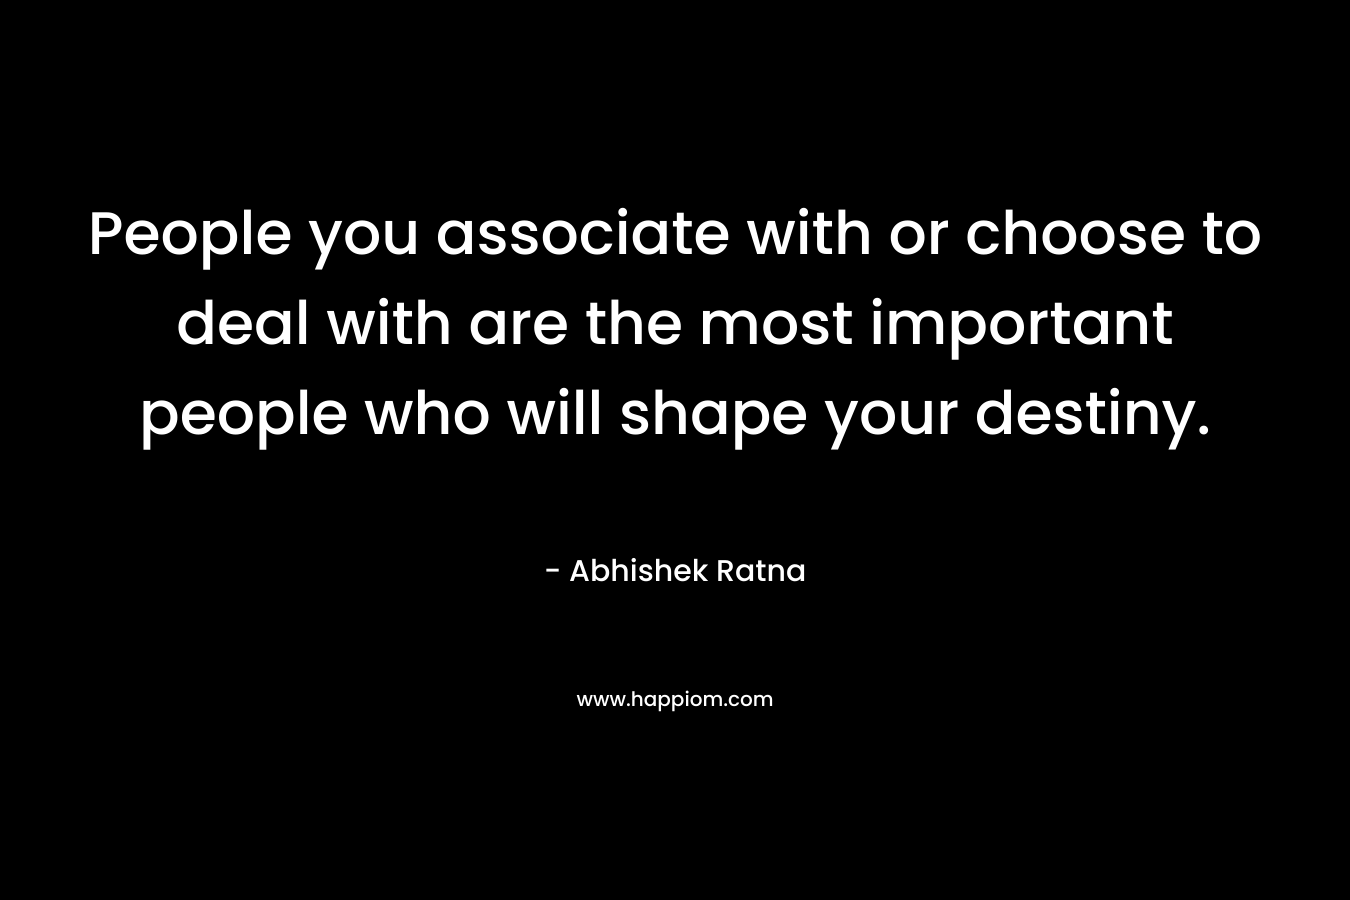 People you associate with or choose to deal with are the most important people who will shape your destiny. – Abhishek Ratna